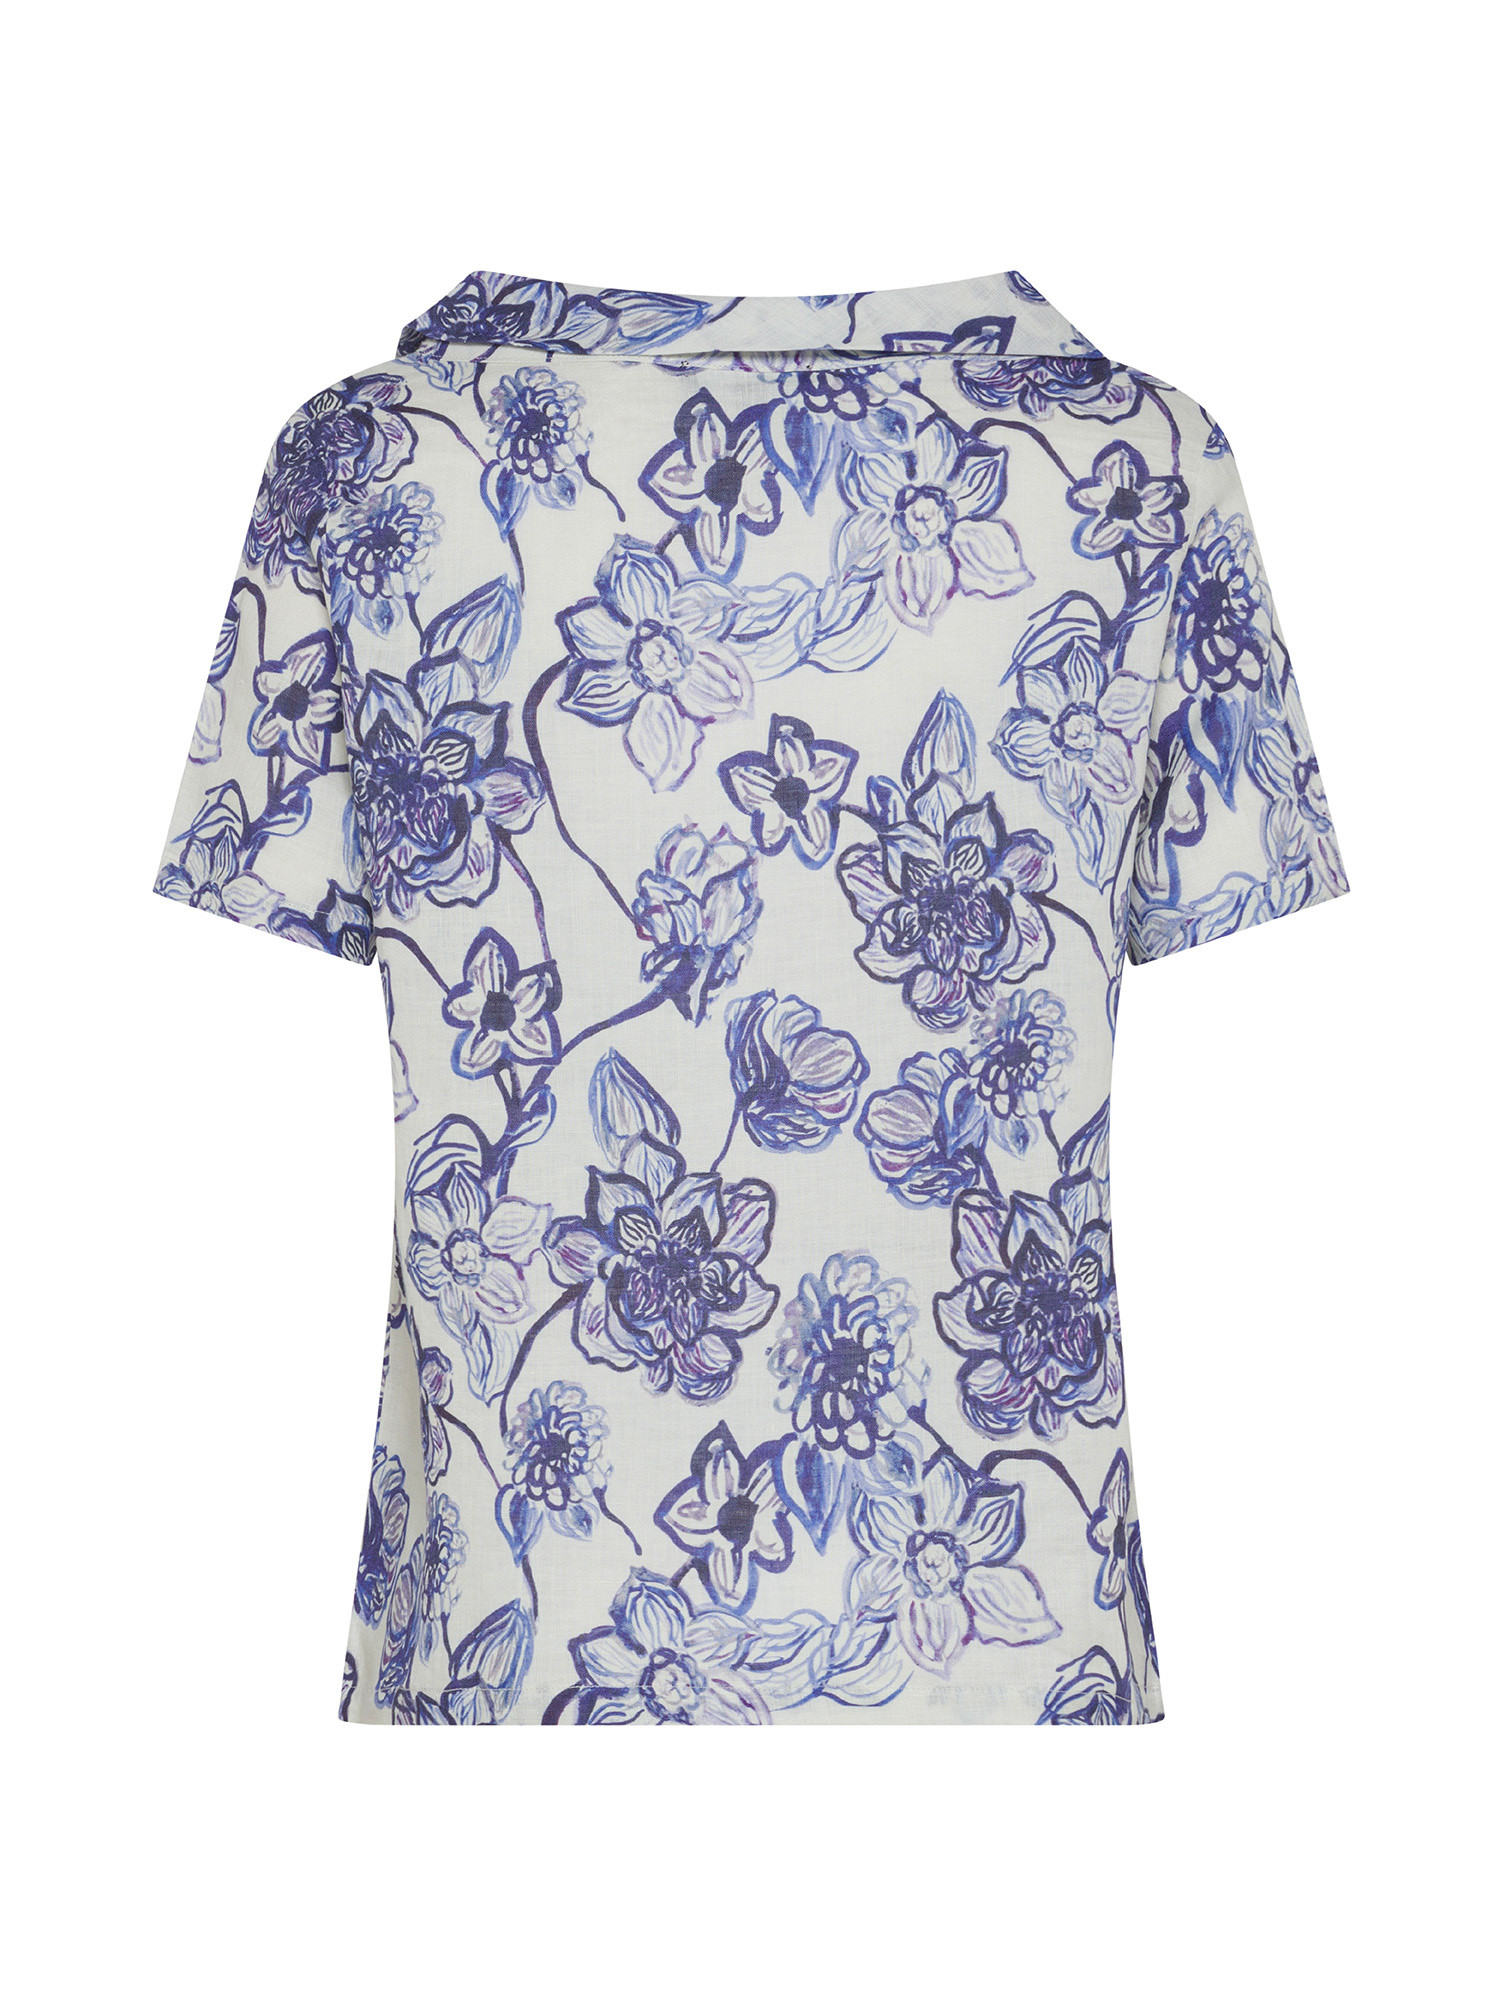 Koan - Pure linen blouse with print, White, large image number 1